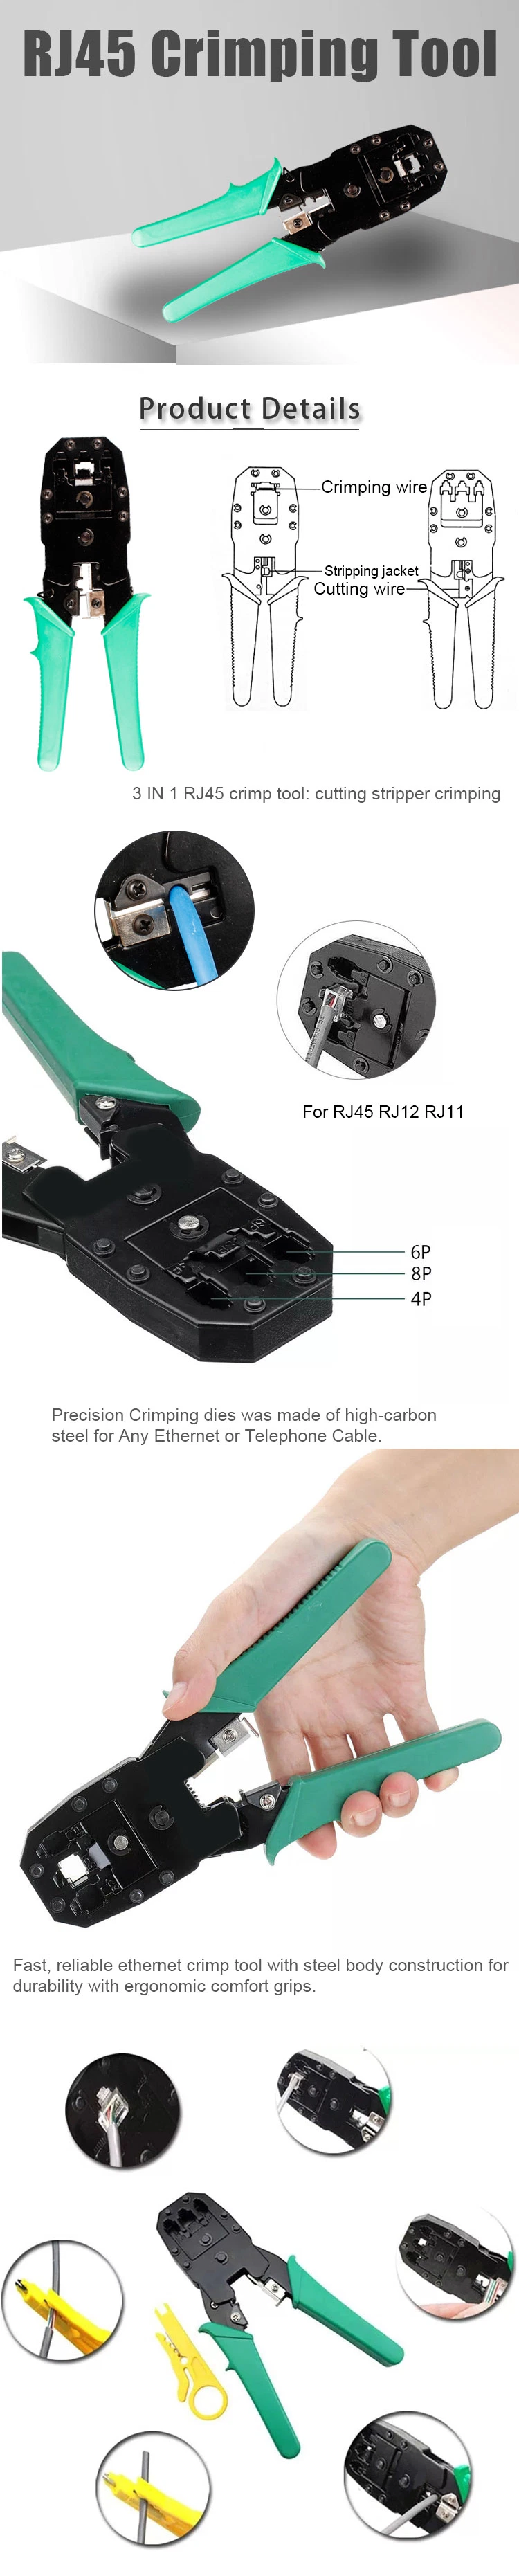 Gcabling RJ45 Tool Computer Cable Tool Network Hand Cutting Stripping Crimping Tool